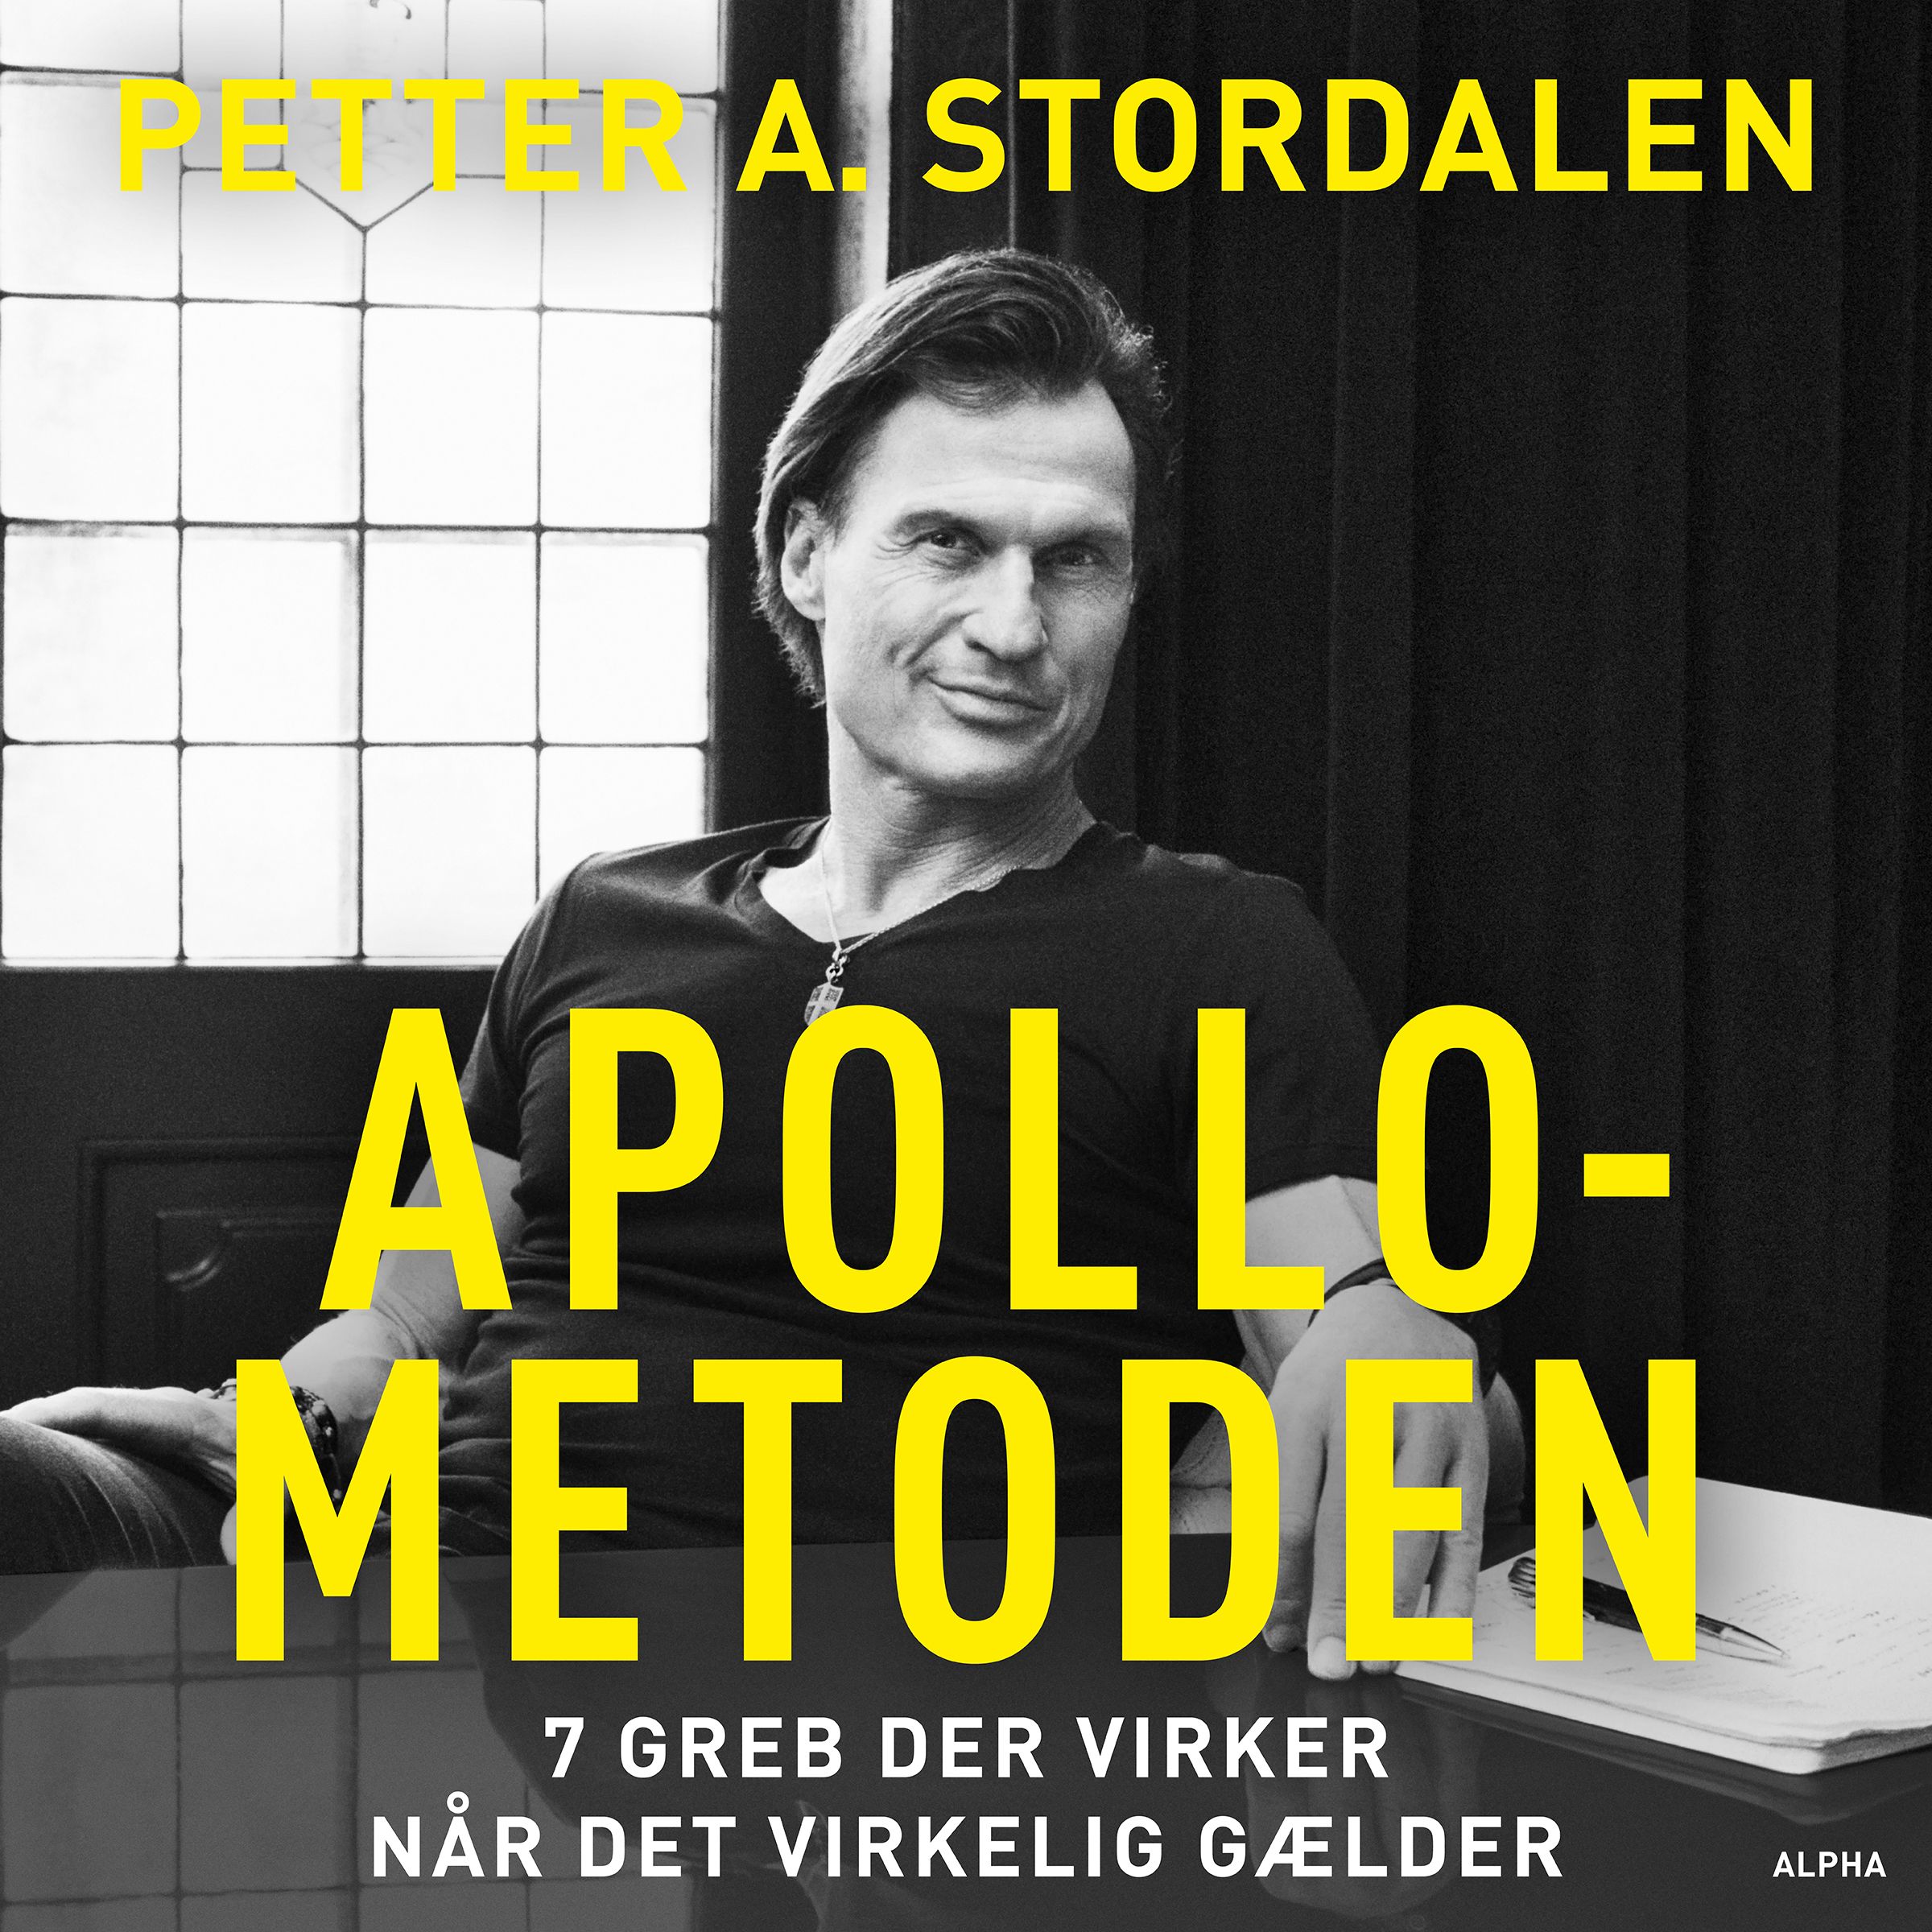 Apollo-metoden, audiobook by Petter A. Stordalen